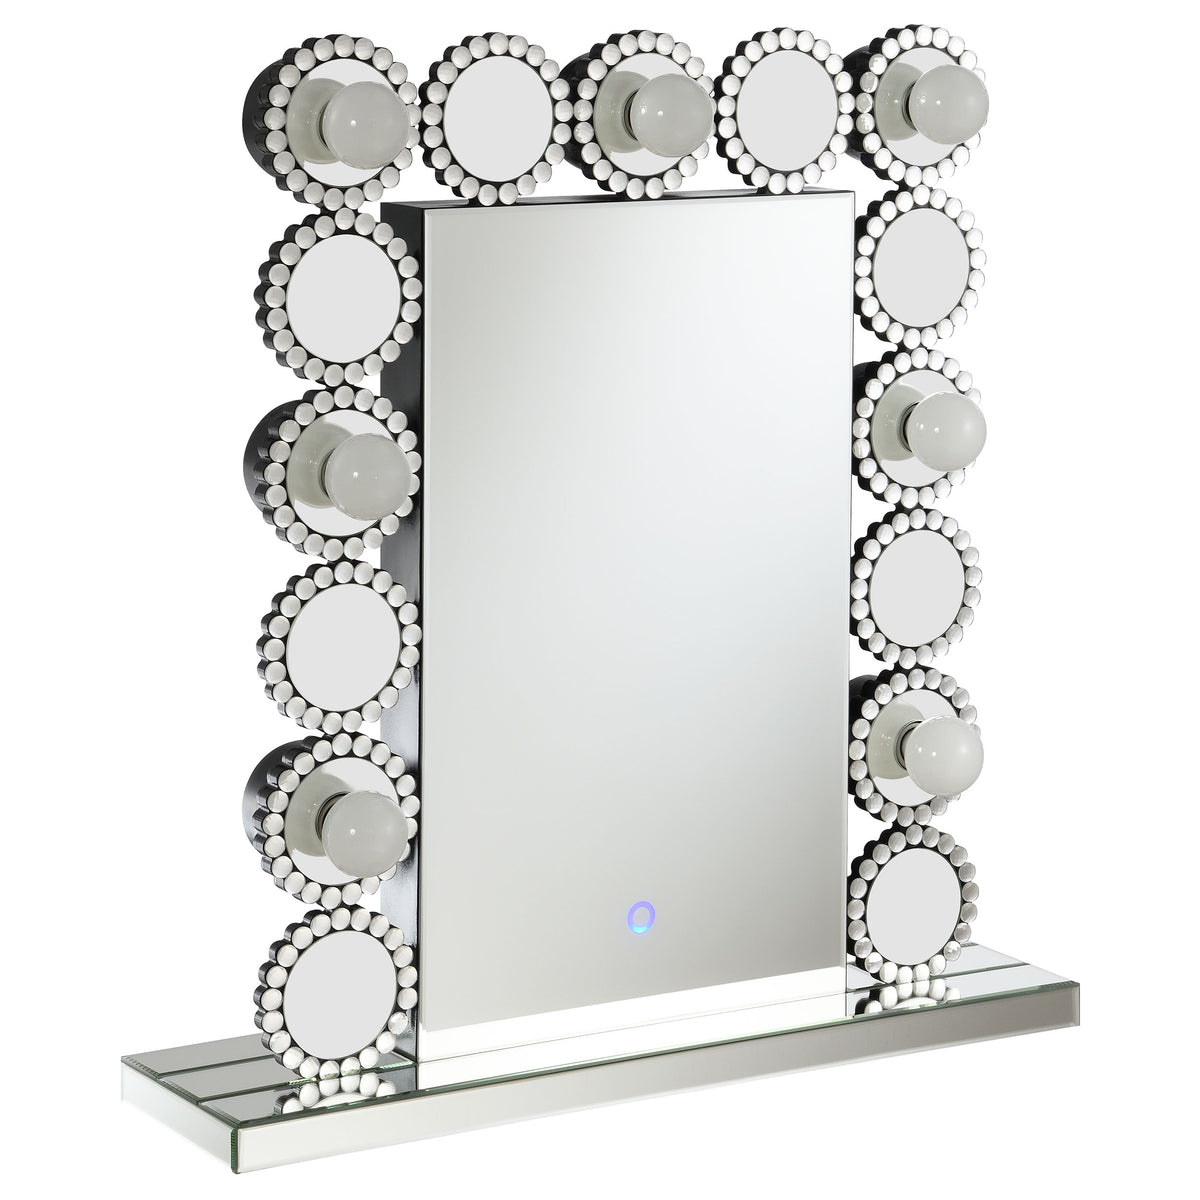 Aghes Rectangular Table Mirror with LED Lighting Mirror  Half Price Furniture